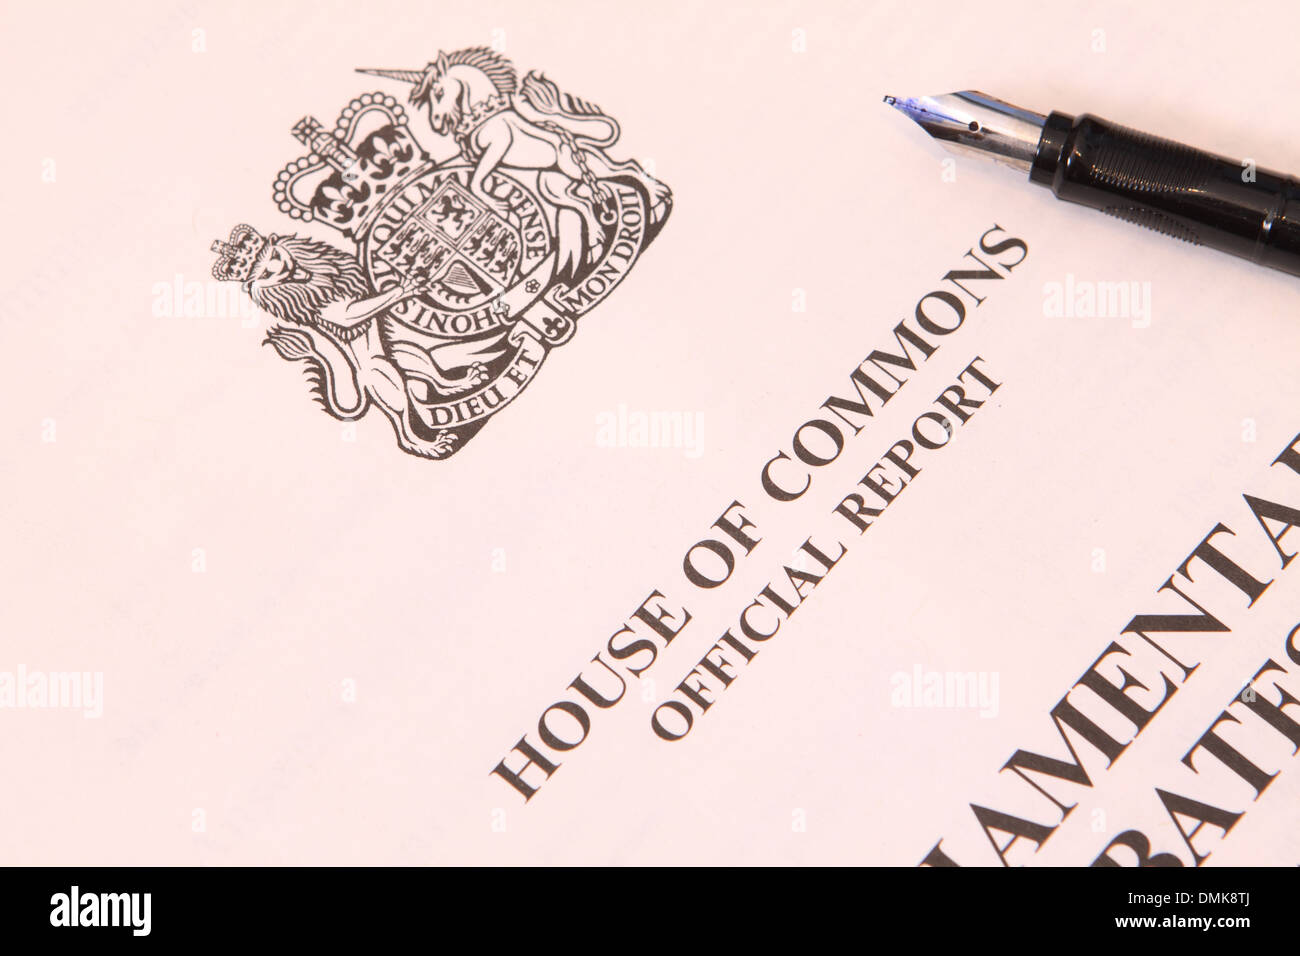 House of Commons official parliamentary report UK Stock Photo